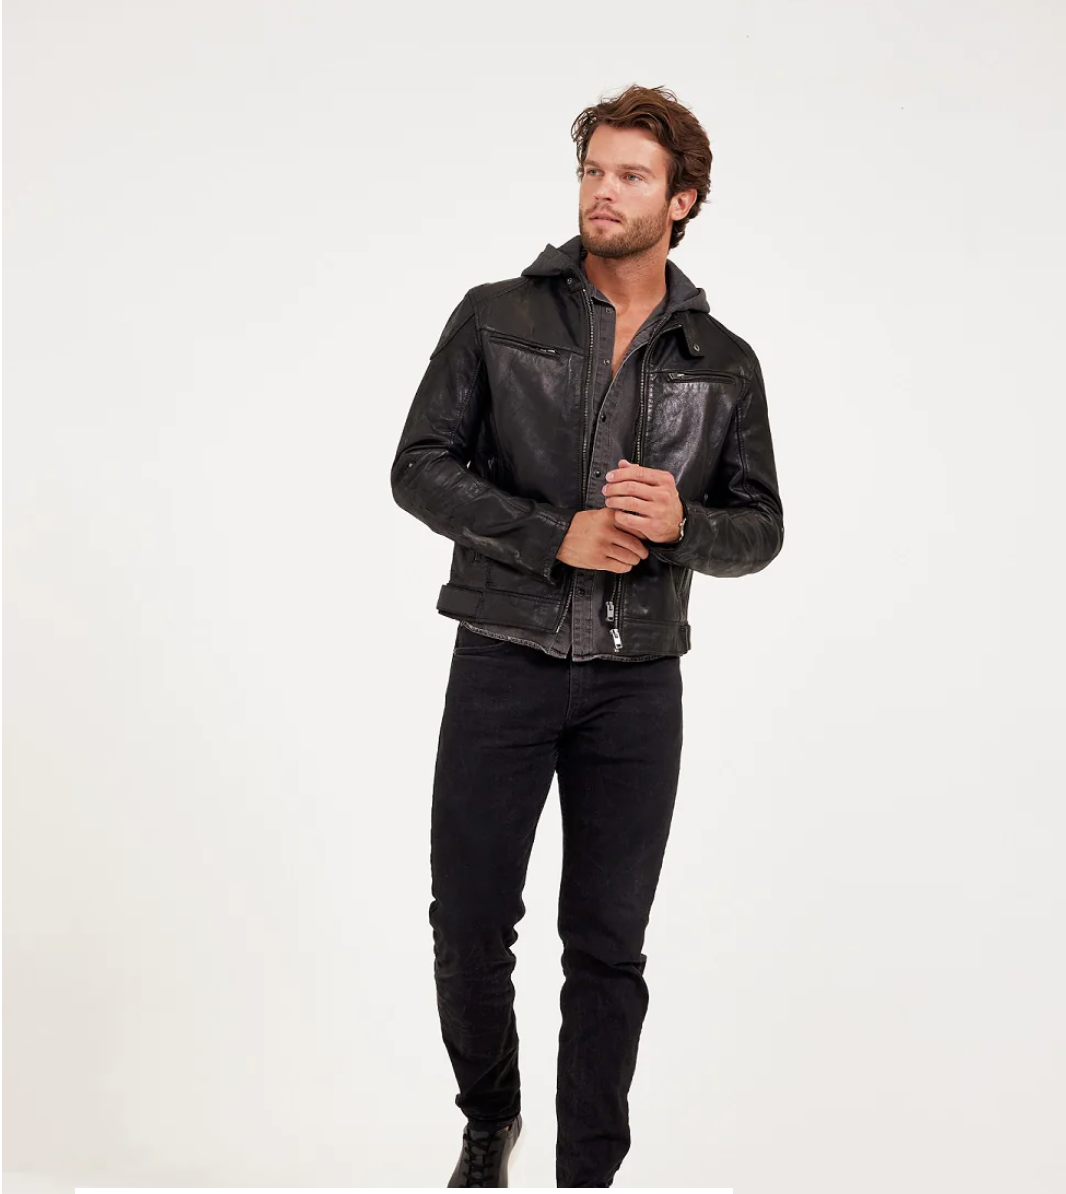 Mauritius Leather jacket. German-made menswear staple, embraced for 30 years. Now in the US, our lambskin leather jacket offers a 'muscle' fit, versatility, and timeless style. Featured at Rustic Chic Boutique Mackinac Island